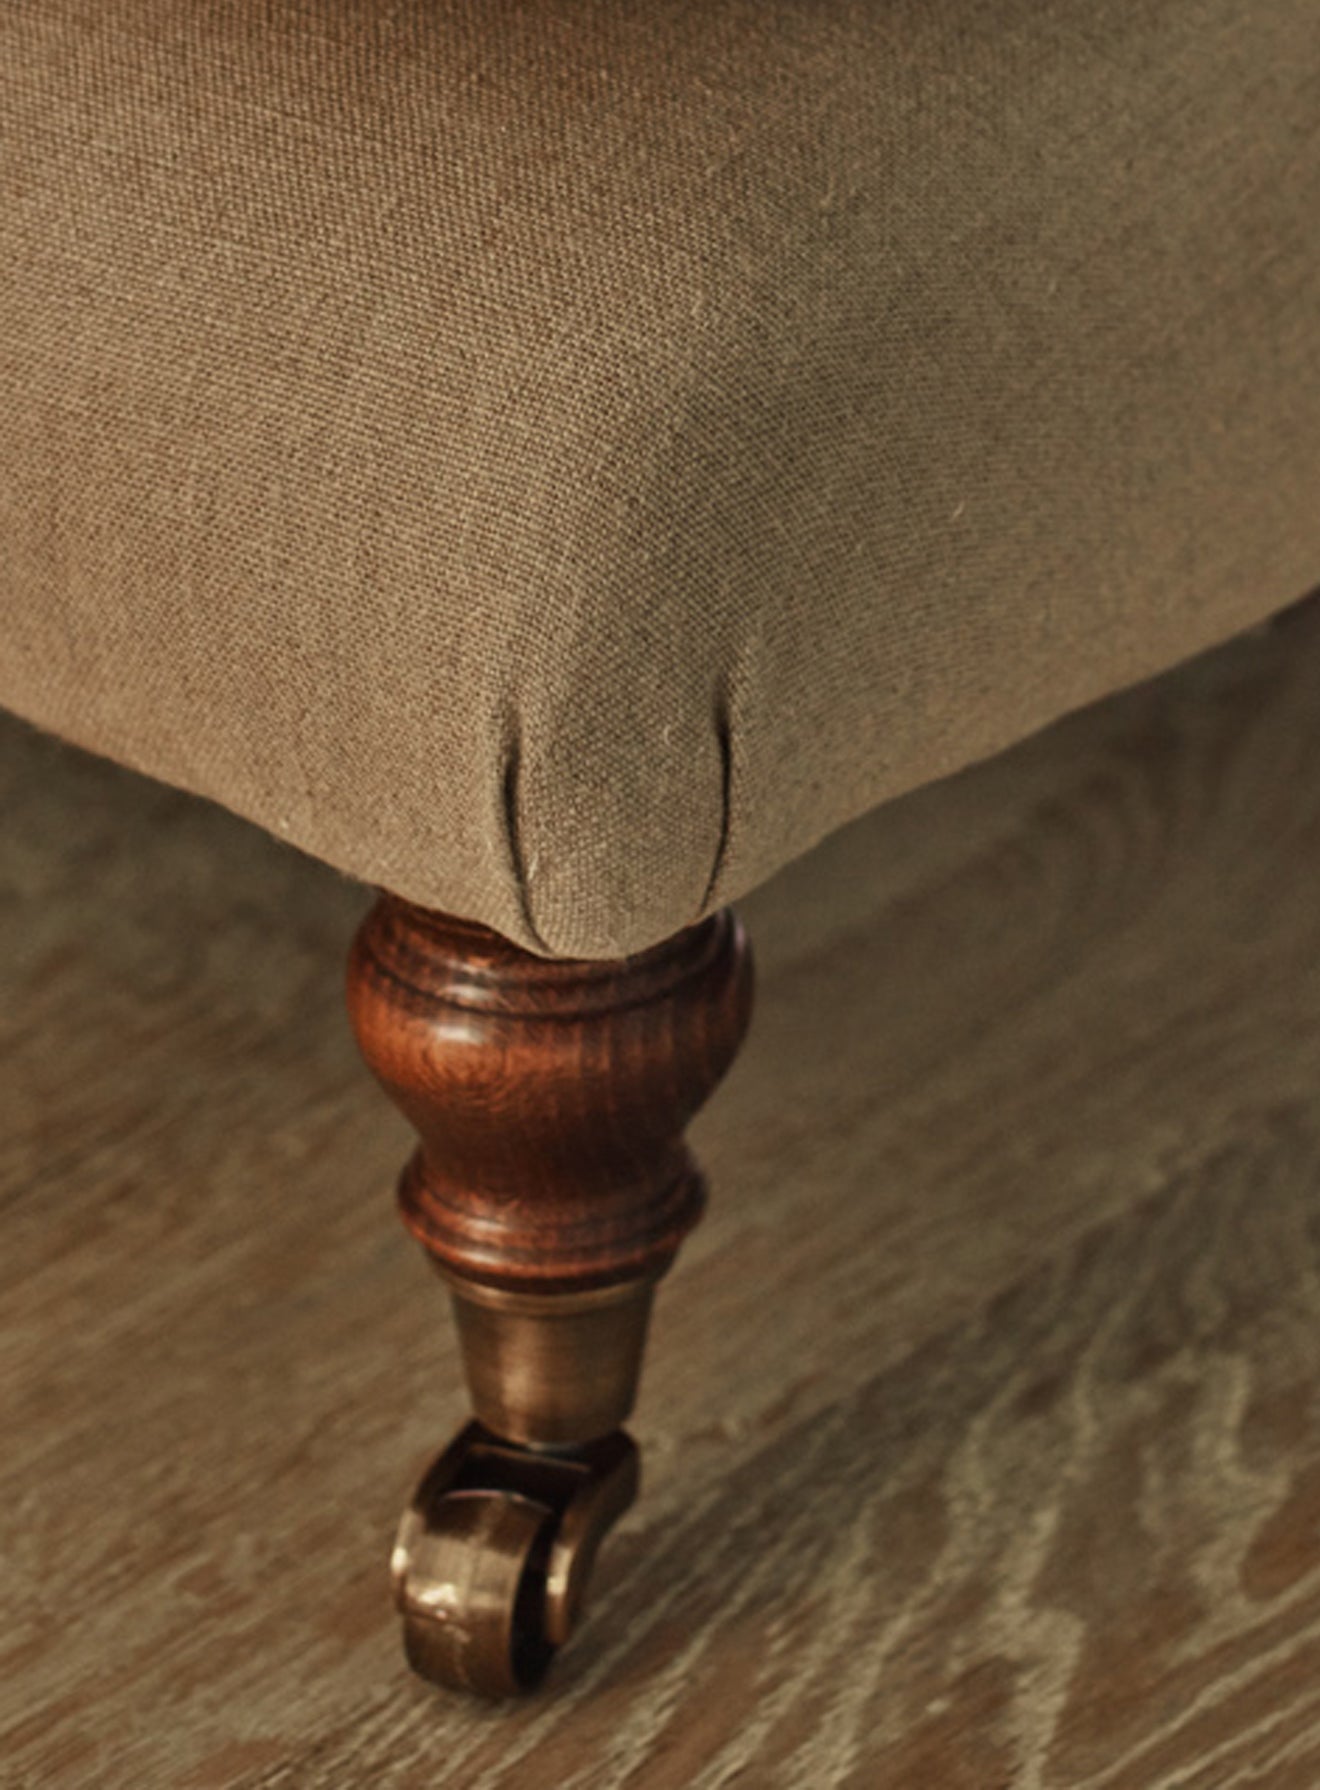 Remy Footstool, Natural Linen